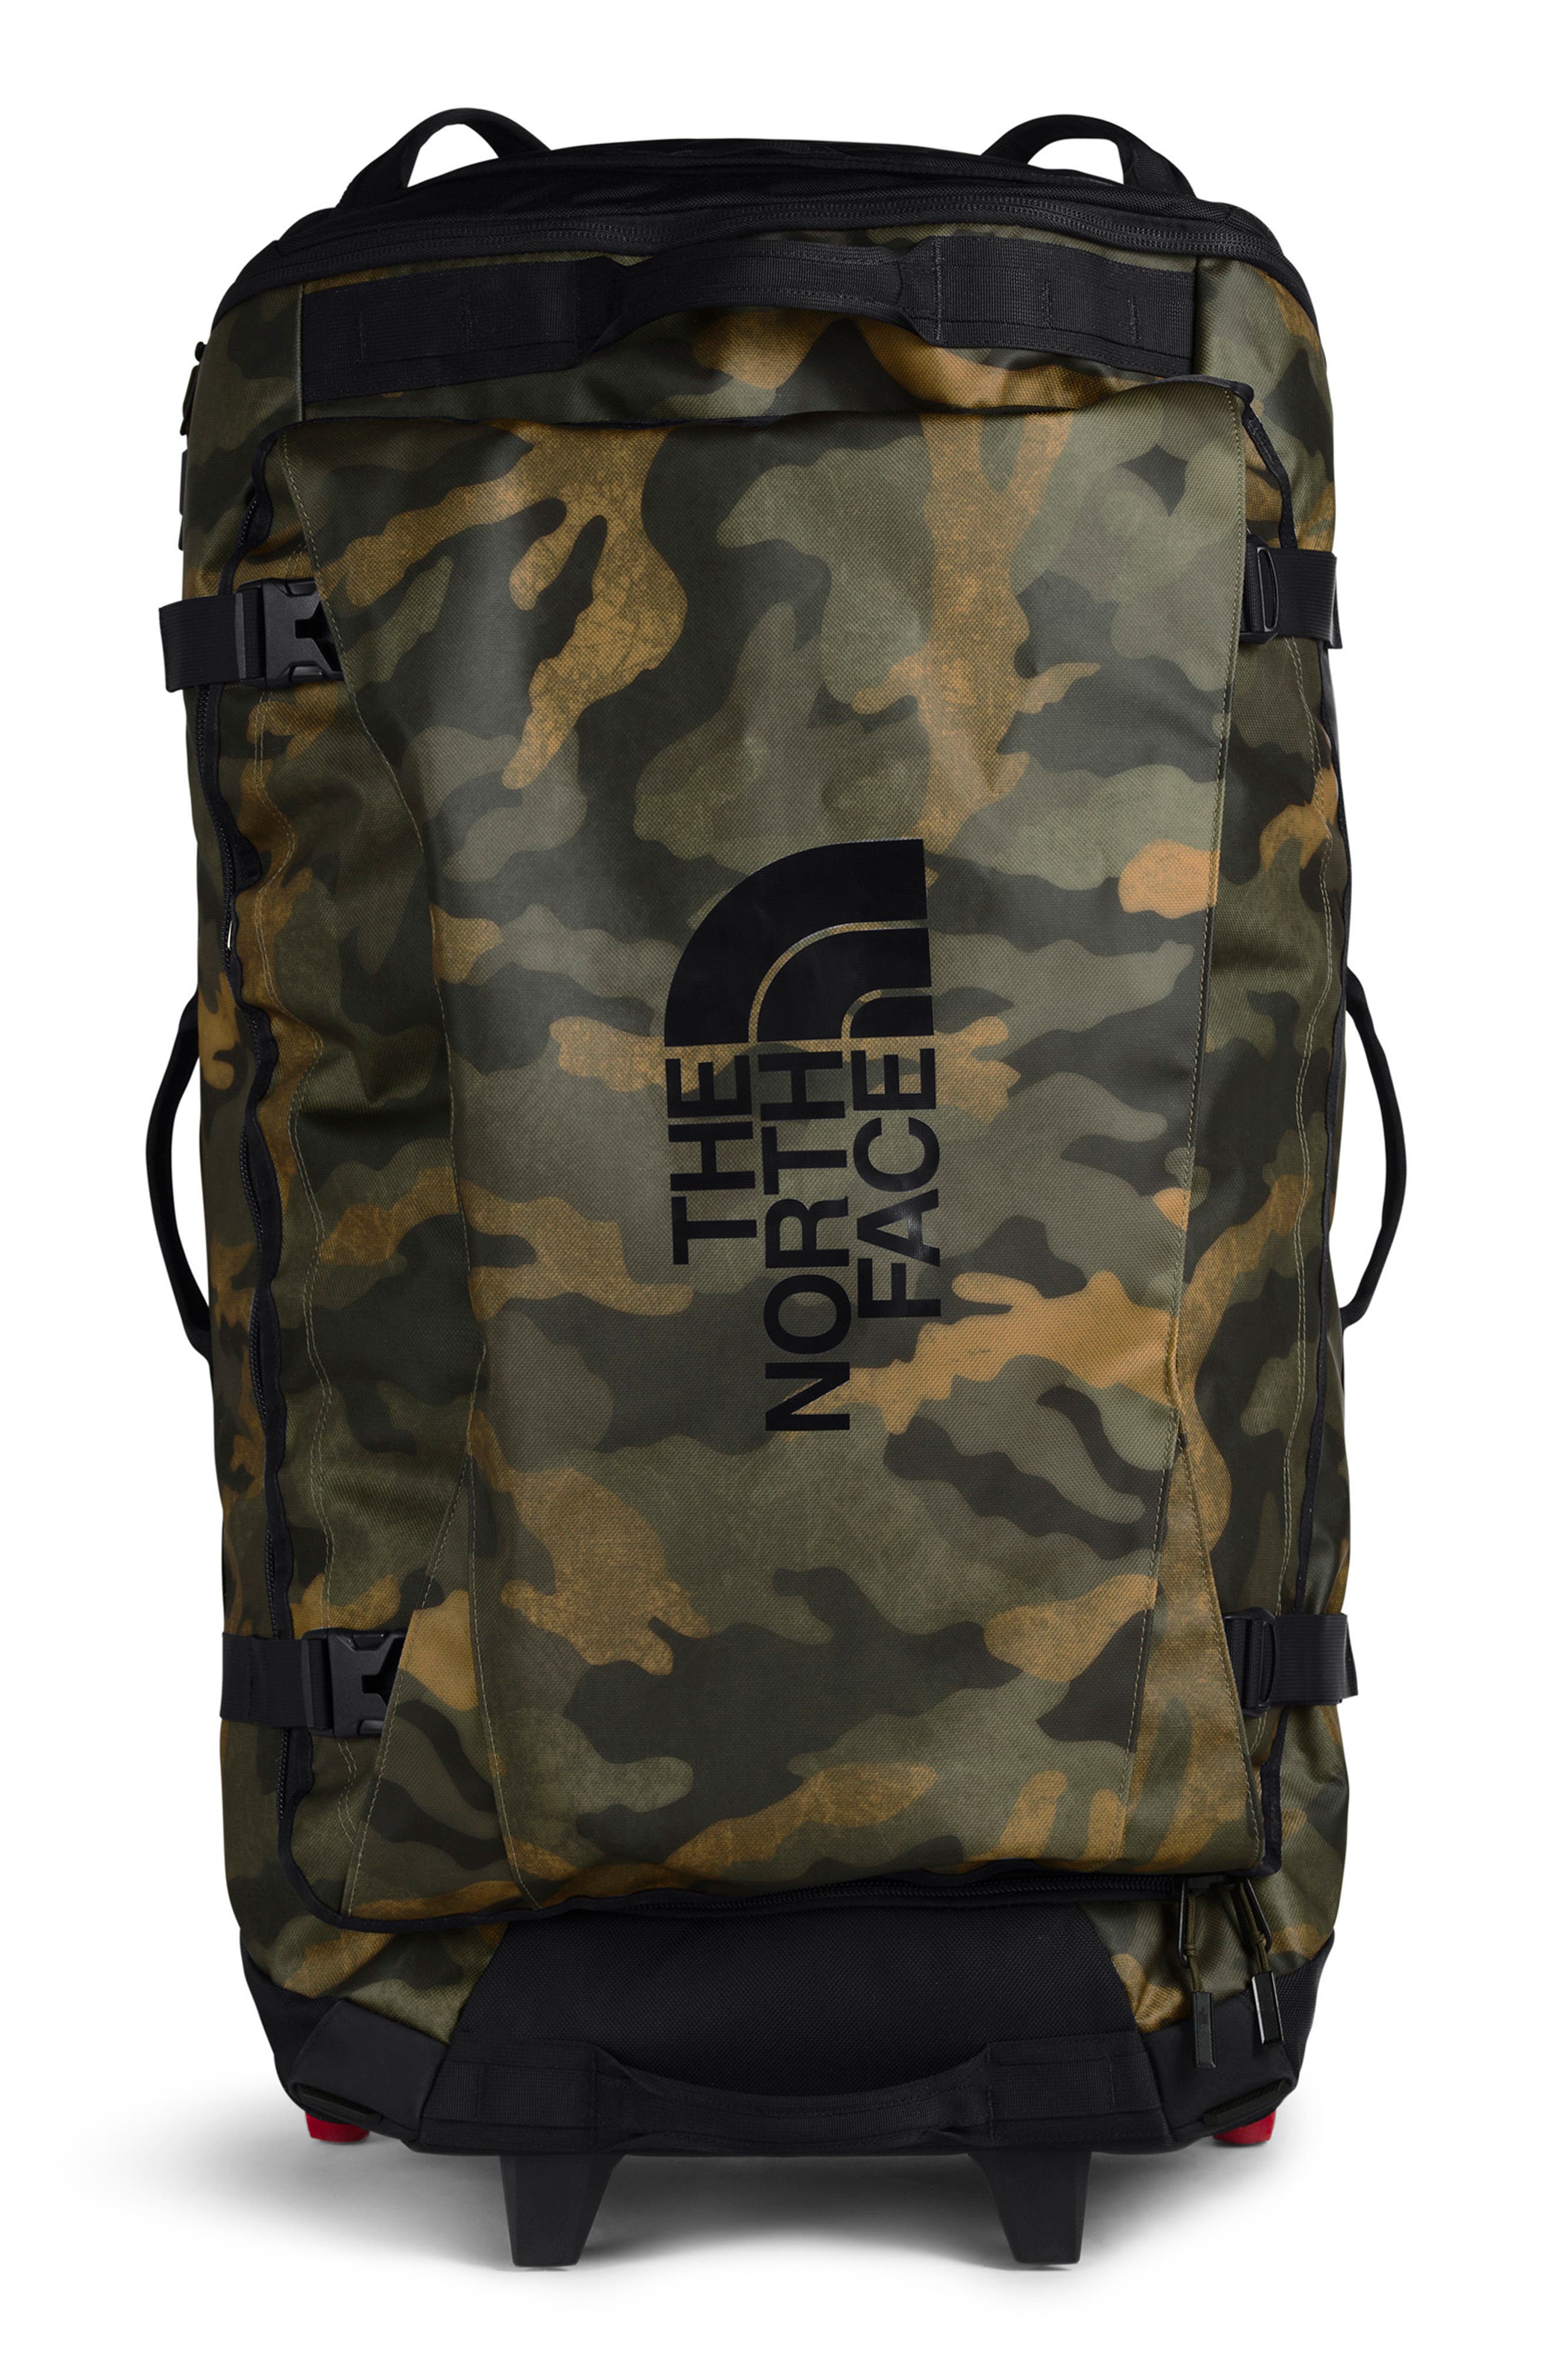 duffle bag the north face